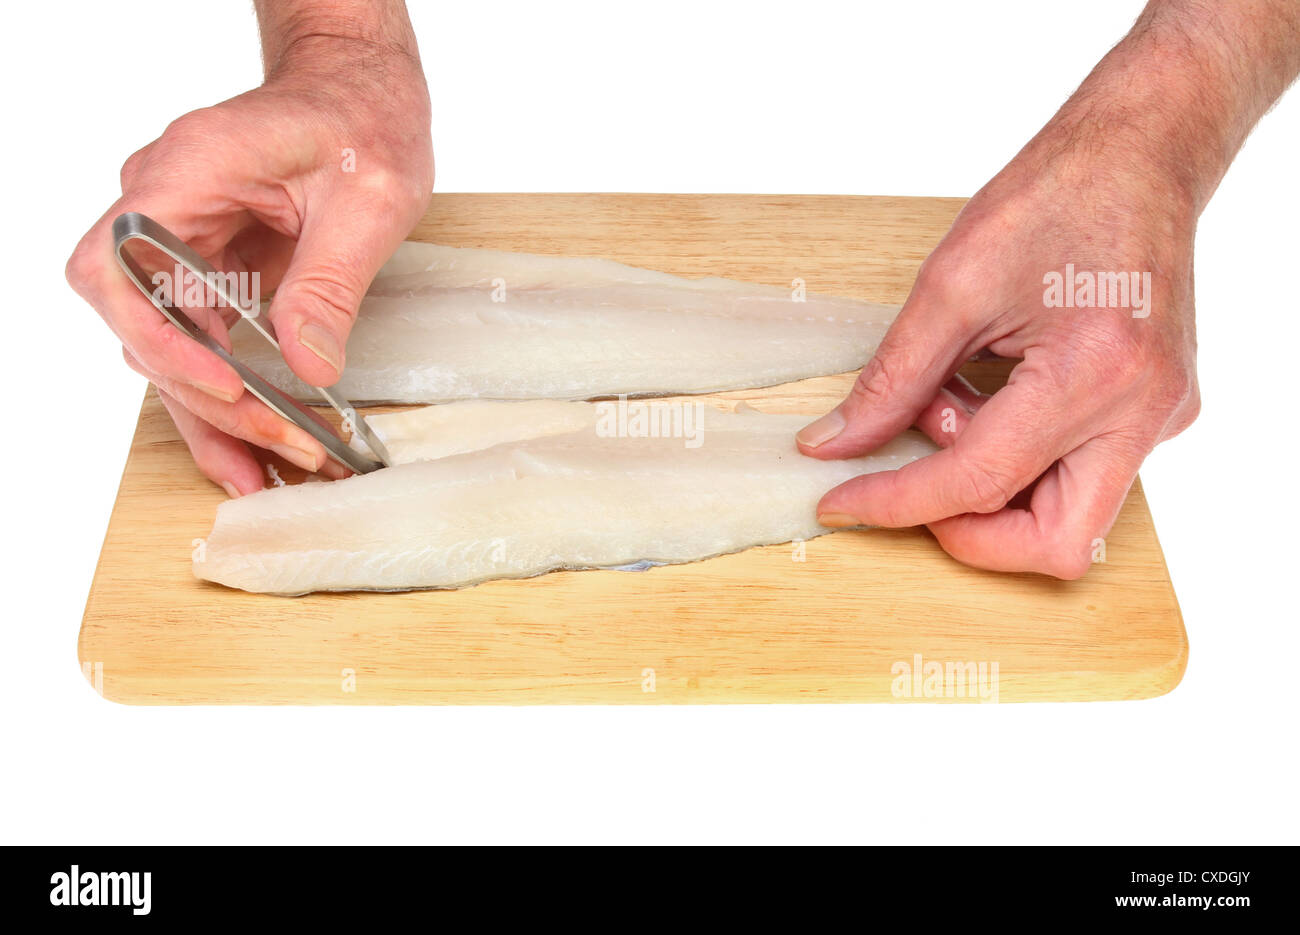 Hands pin boning fish fillets on a wooden board isolated against white Stock Photo